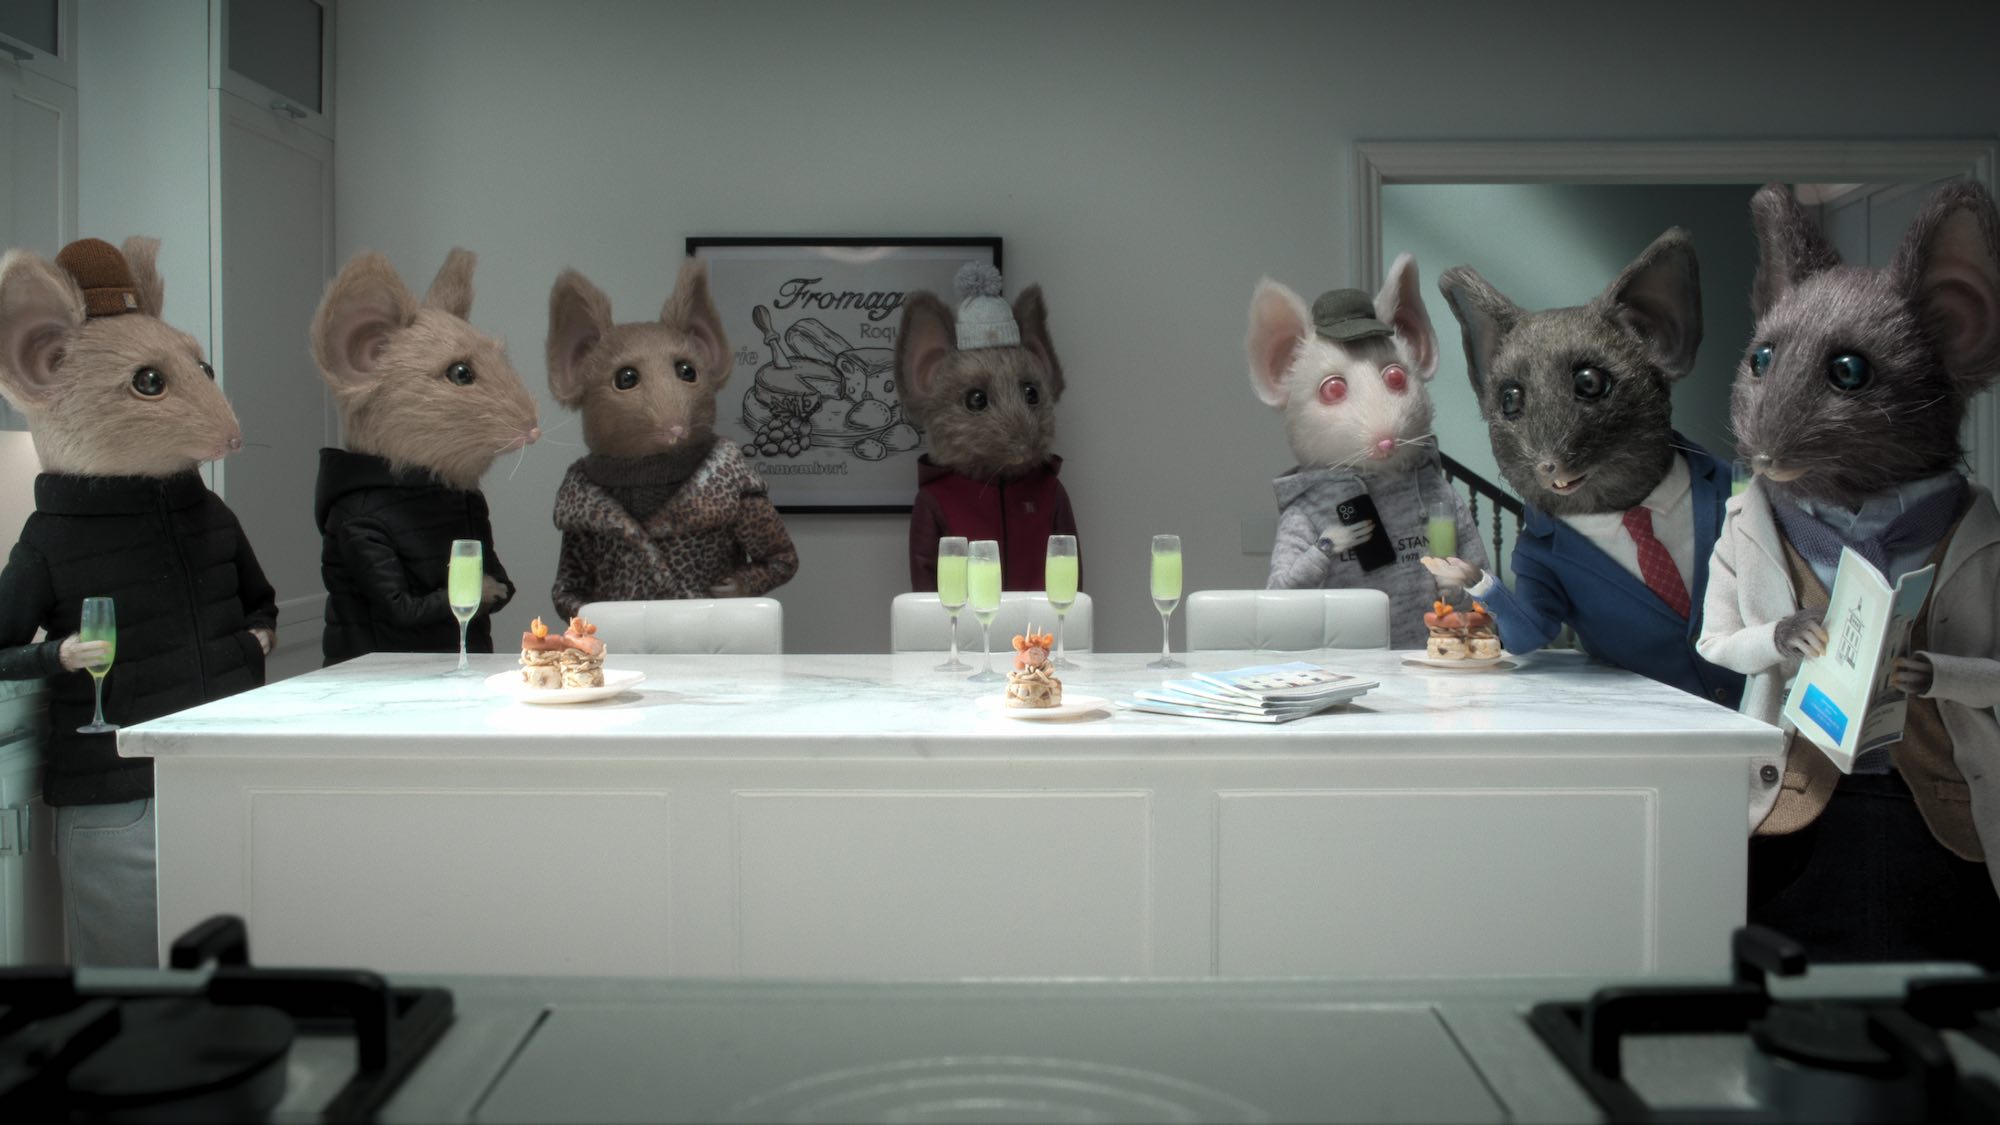 Stop-Motion Short Film Anthology The House Comes to Netflix